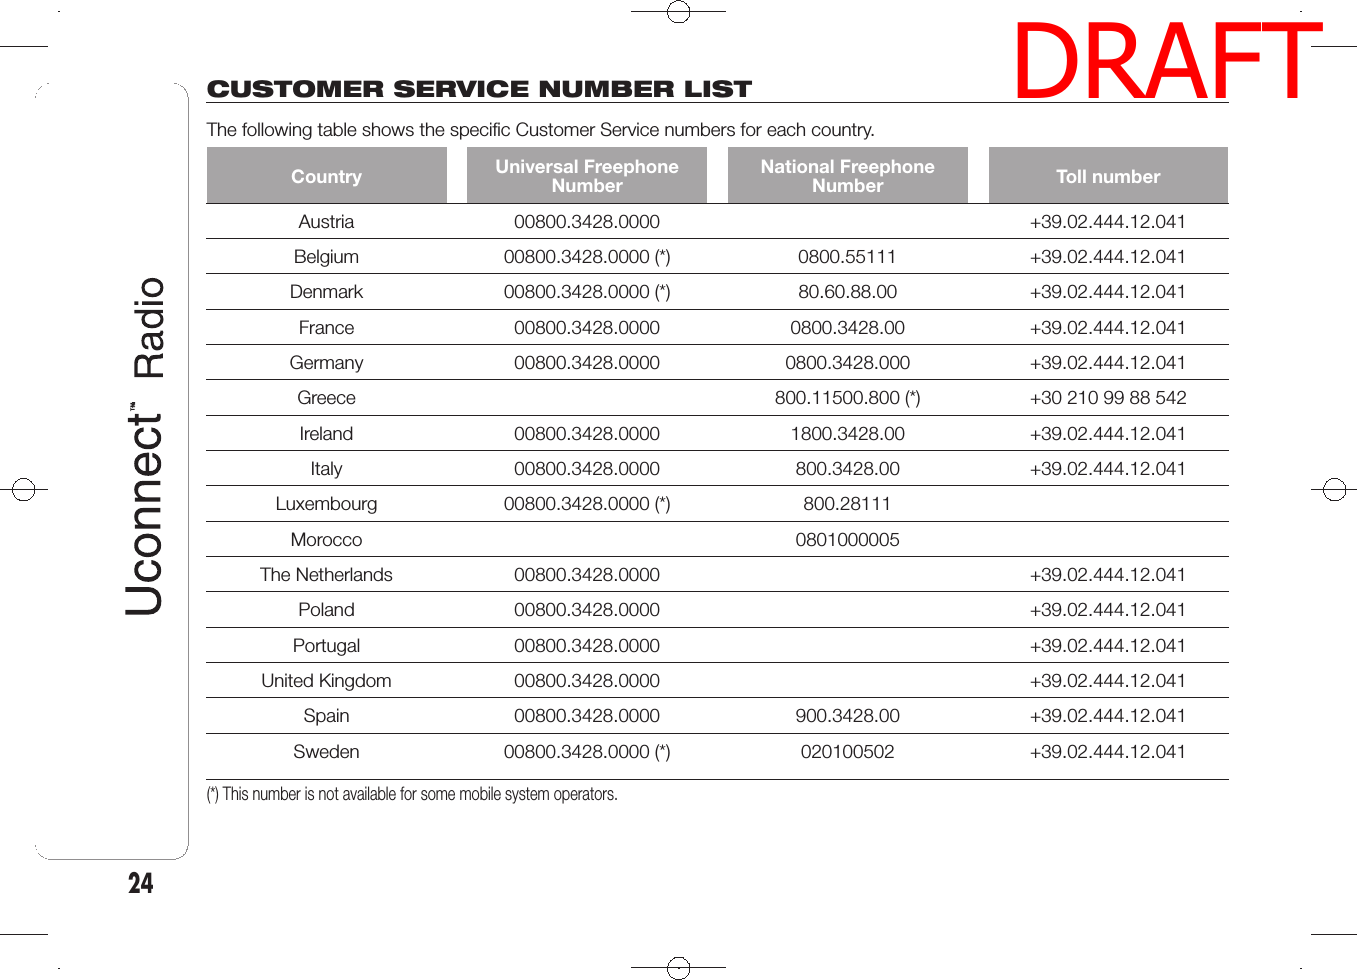 CUSTOMER SERVICE NUMBER LISTThe following table shows the specific Customer Service numbers for each country.Country Universal FreephoneNumberNational FreephoneNumber Toll numberAustria 00800.3428.0000 +39.02.444.12.041Belgium 00800.3428.0000 (*) 0800.55111 +39.02.444.12.041Denmark 00800.3428.0000 (*) 80.60.88.00 +39.02.444.12.041France 00800.3428.0000 0800.3428.00 +39.02.444.12.041Germany 00800.3428.0000 0800.3428.000 +39.02.444.12.041Greece 800.11500.800 (*) +30 210 99 88 542Ireland 00800.3428.0000 1800.3428.00 +39.02.444.12.041Italy 00800.3428.0000 800.3428.00 +39.02.444.12.041Luxembourg 00800.3428.0000 (*) 800.28111Morocco 0801000005The Netherlands 00800.3428.0000 +39.02.444.12.041Poland 00800.3428.0000 +39.02.444.12.041Portugal 00800.3428.0000 +39.02.444.12.041United Kingdom 00800.3428.0000 +39.02.444.12.041Spain 00800.3428.0000 900.3428.00 +39.02.444.12.041Sweden 00800.3428.0000 (*) 020100502 +39.02.444.12.041(*) This number is not available for some mobile system operators.24DRAFT